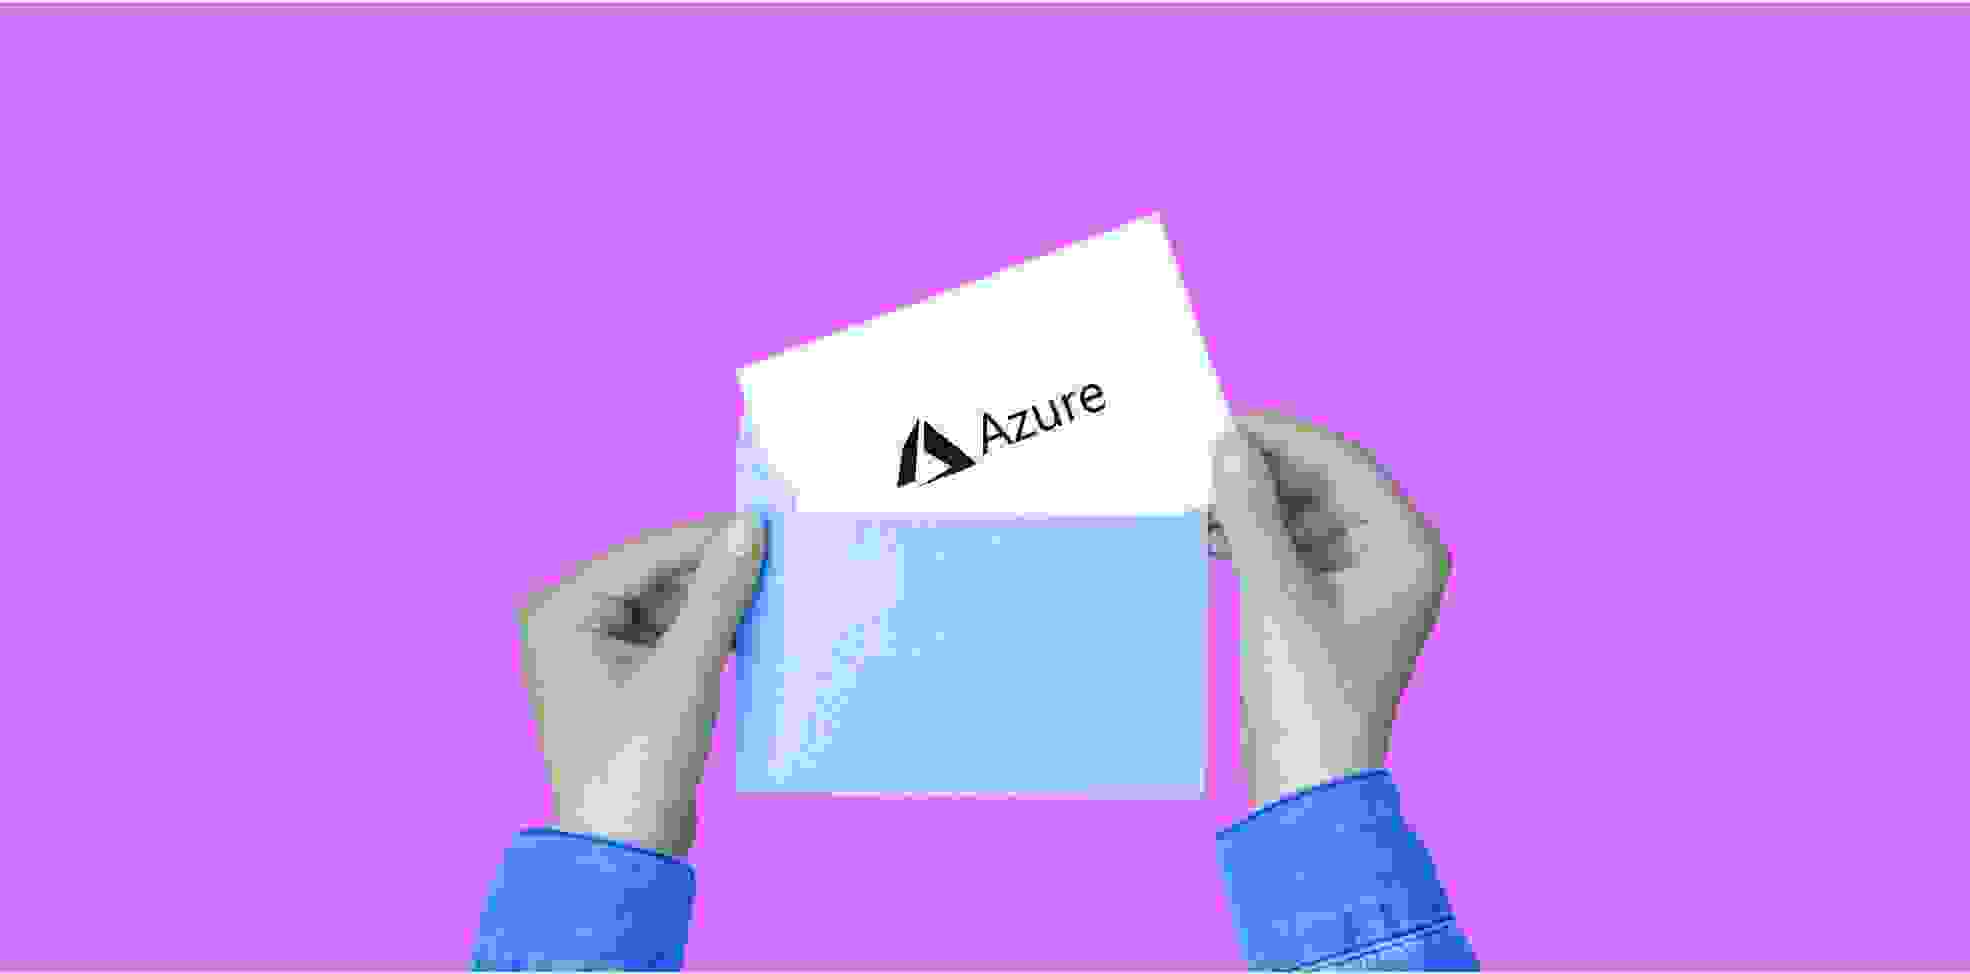 a sheet of paper with a word Azure in an envelope